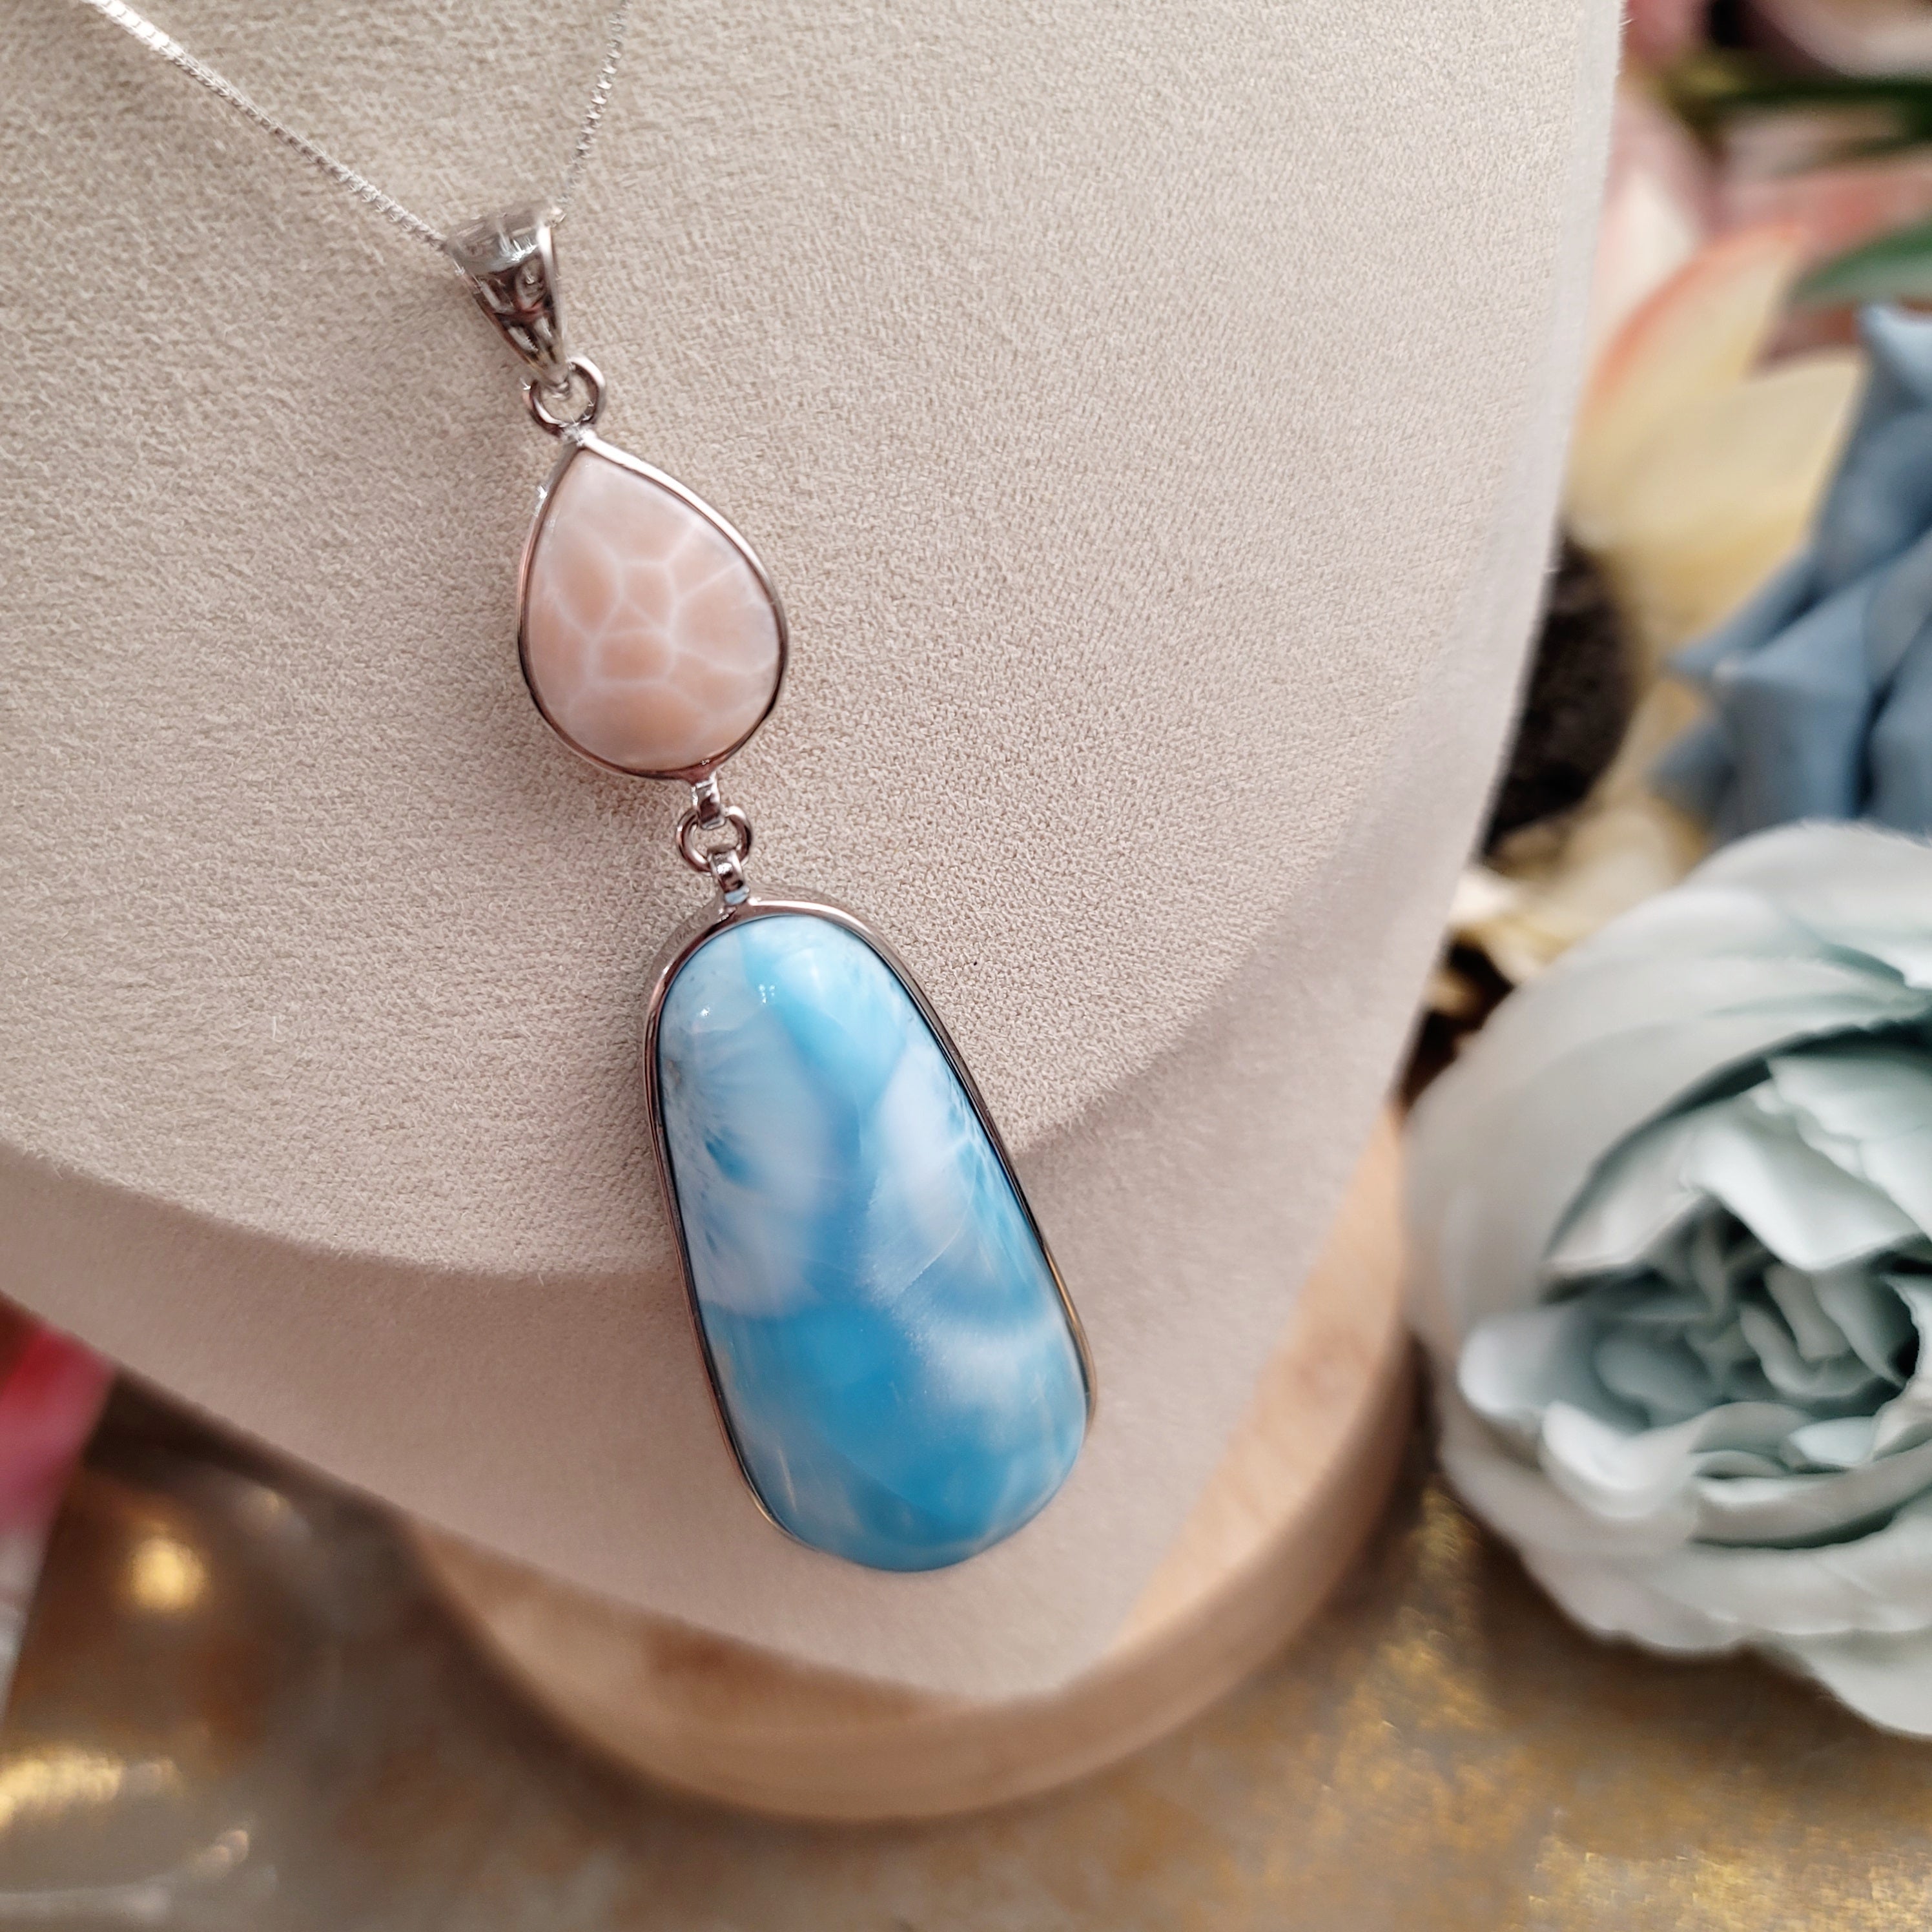 Larimar and Natrolite Necklace for Awakening your Intuitive Powers and Tranquility